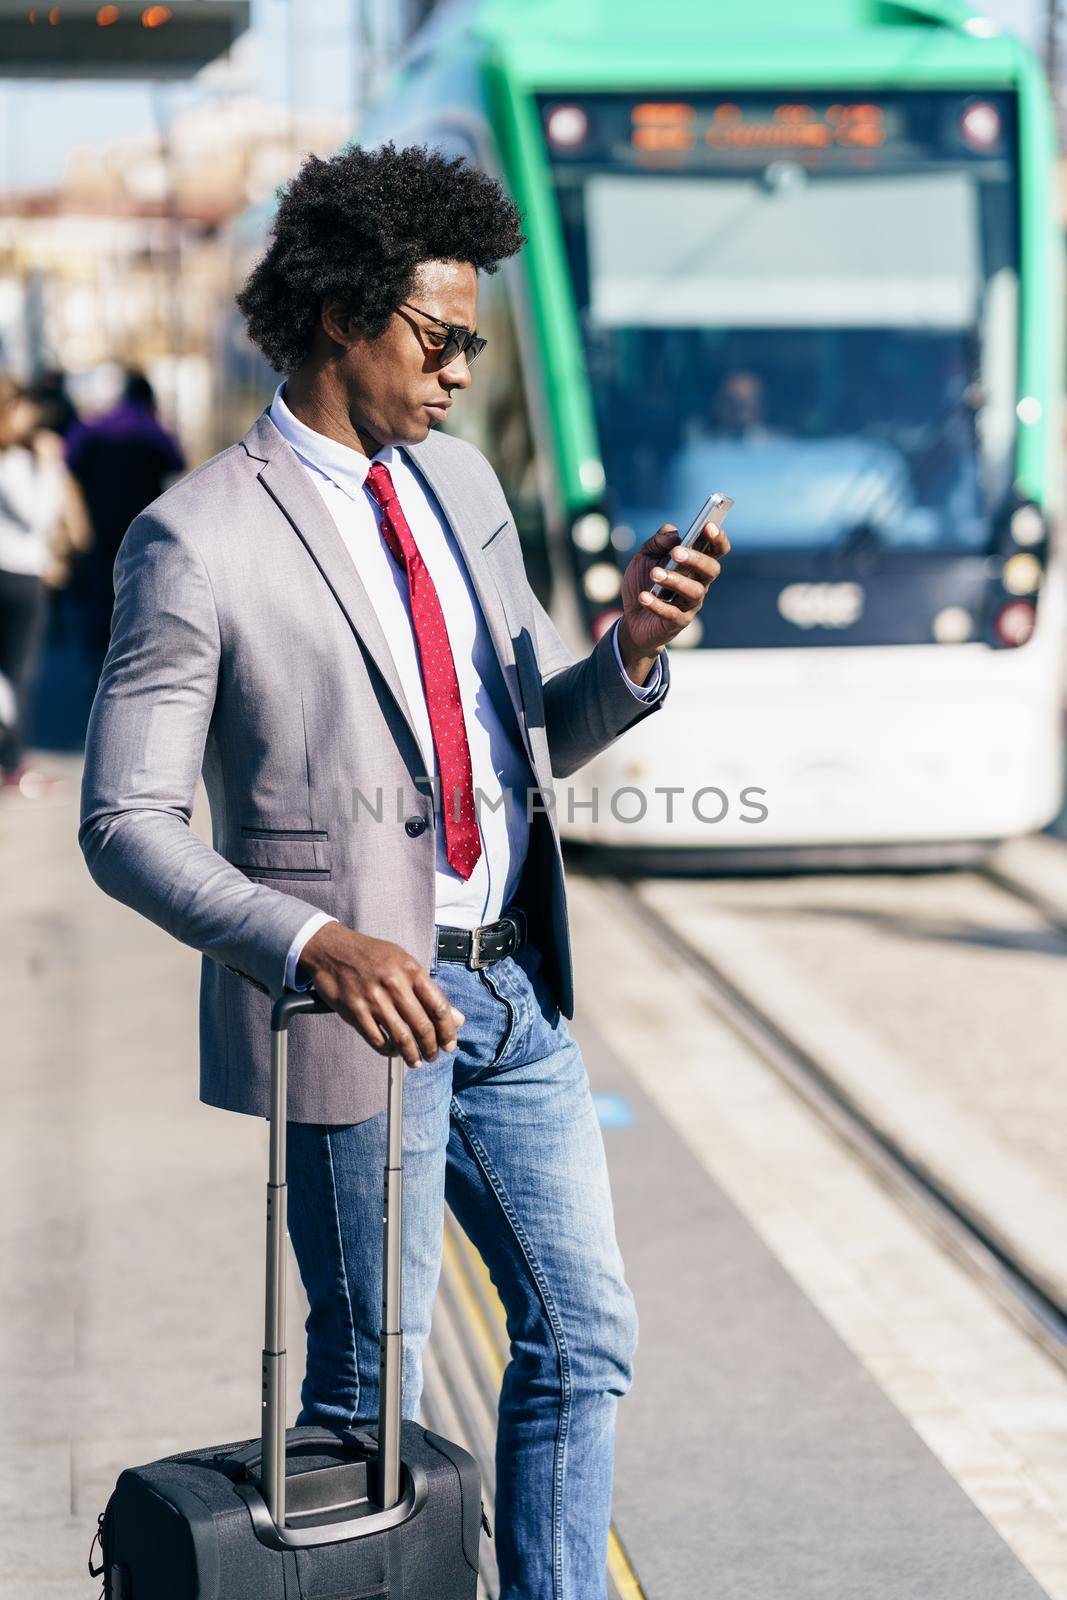 Black Businessman waiting for the next train. Man with afro hair commuting.